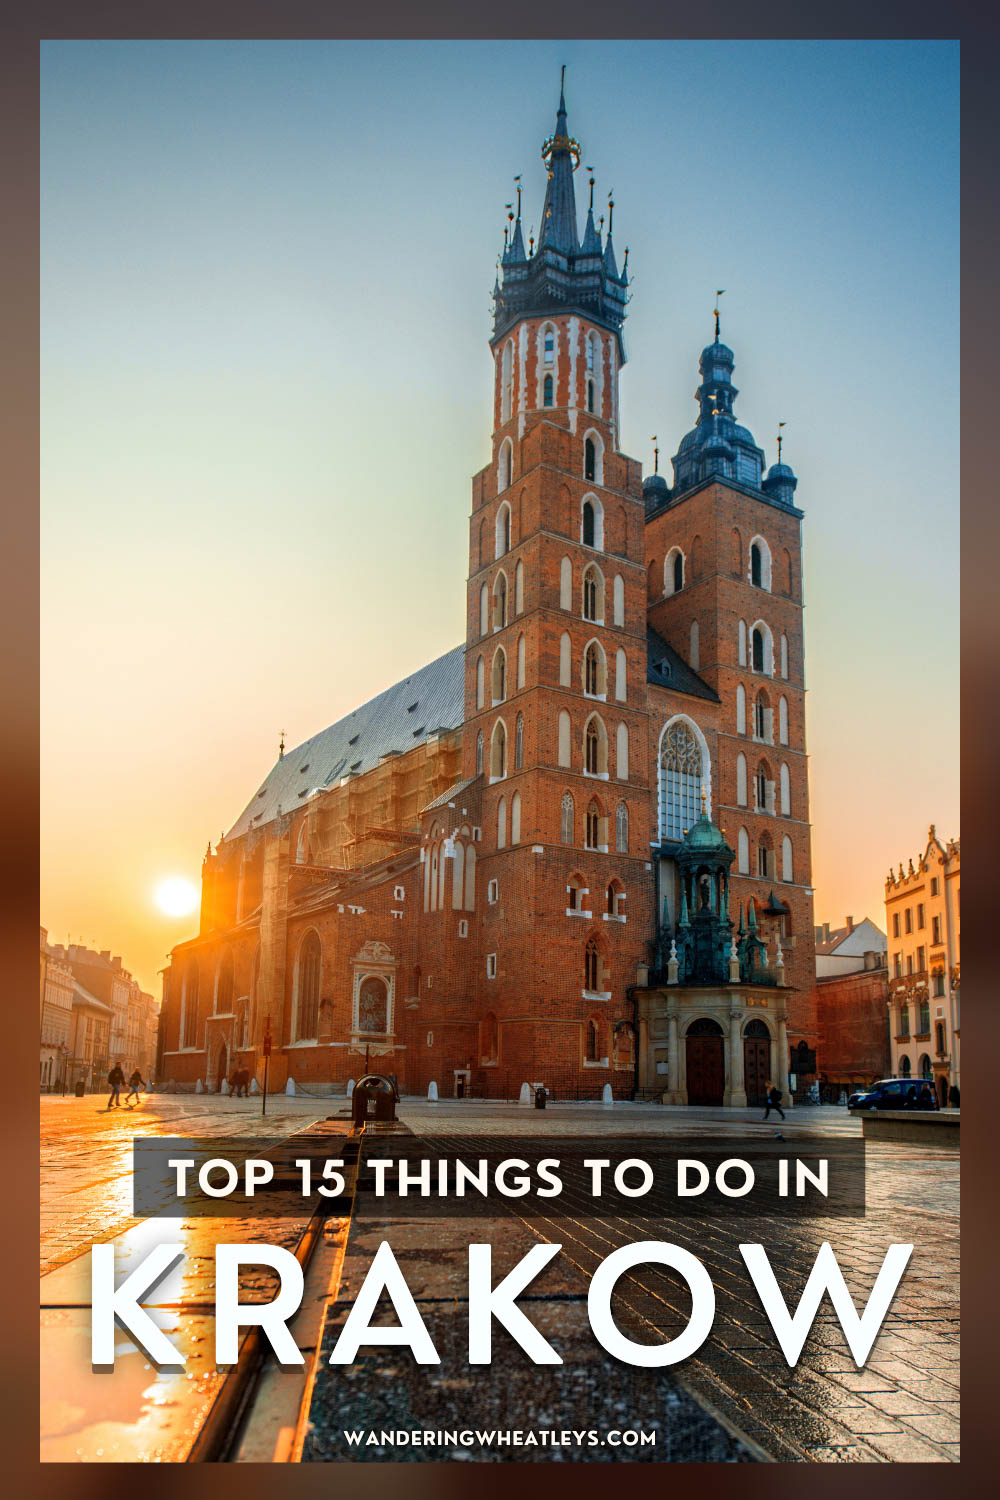 The Best Things to do in Krakow.